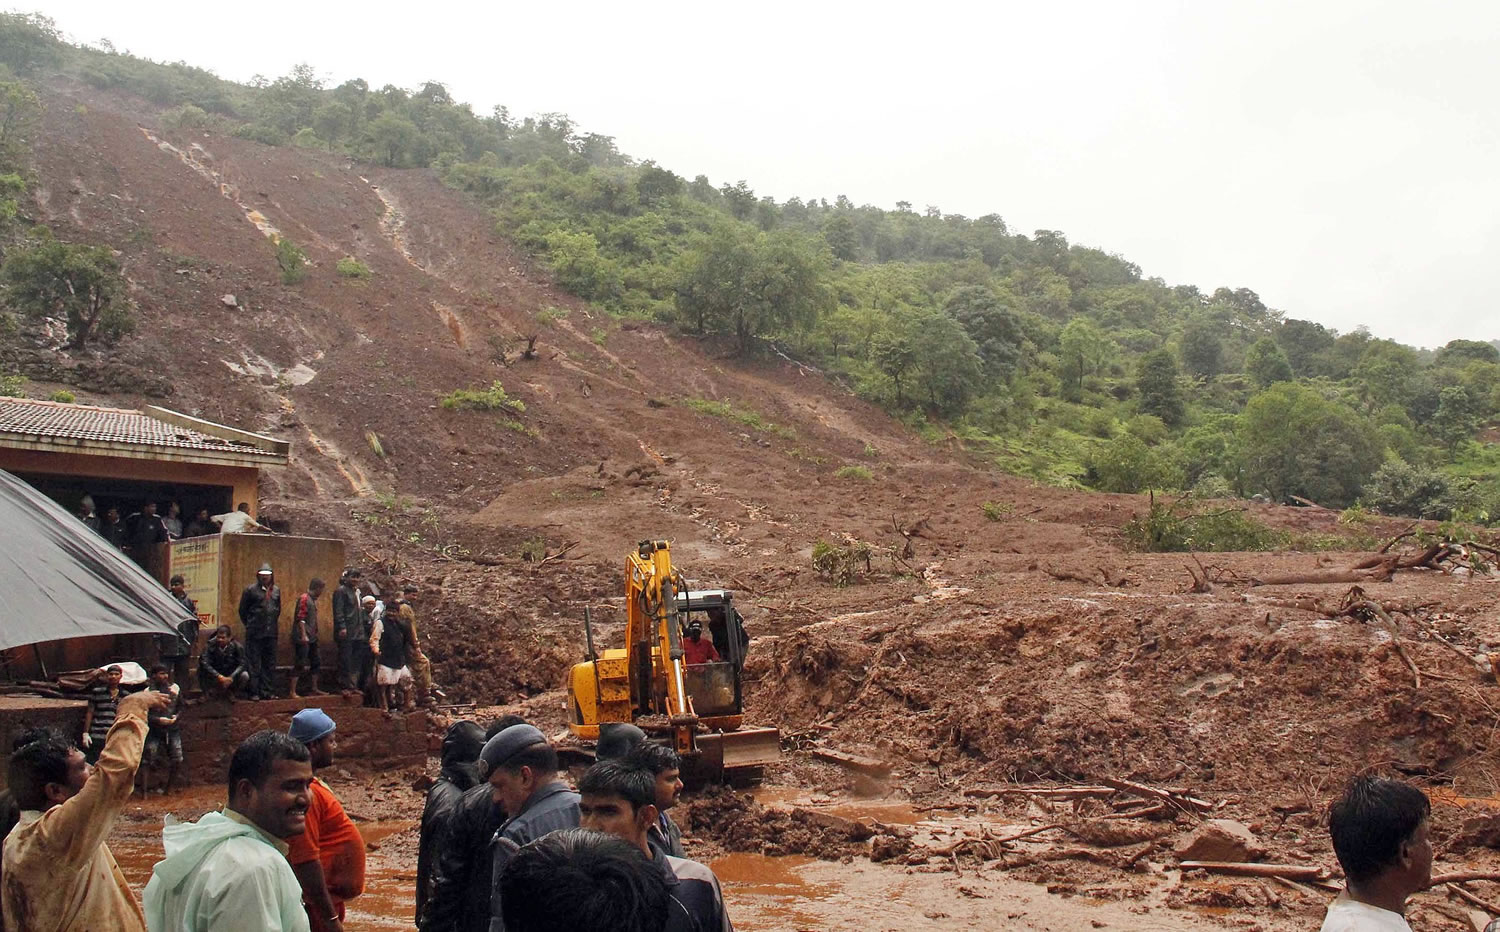 A rescuer clears debris with the help of an excavator at the site of a landslide in Malin village, in the western Indian state of Maharashtra on Wednesday.